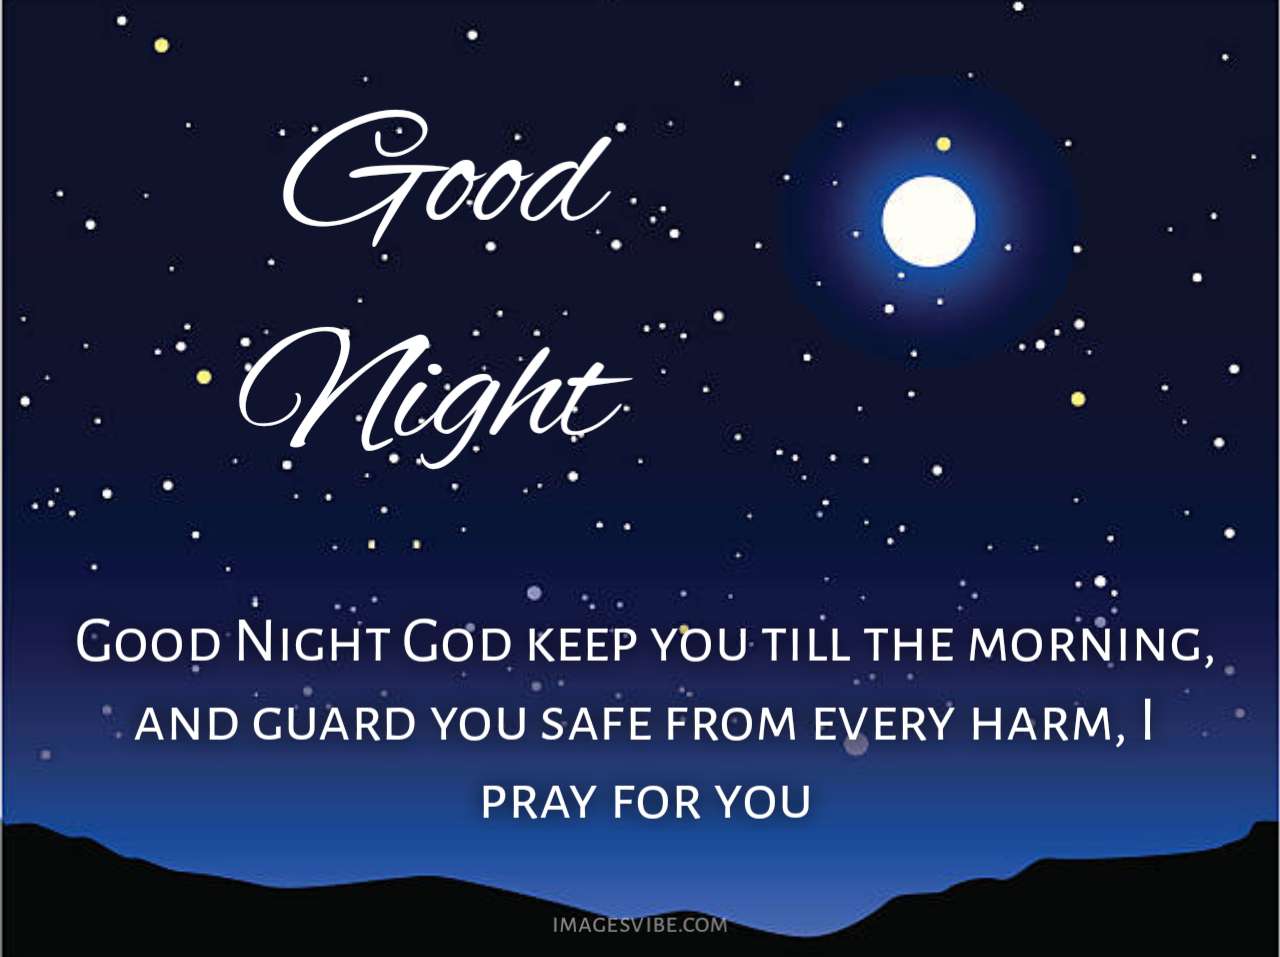 Good Night Blessings Images24 